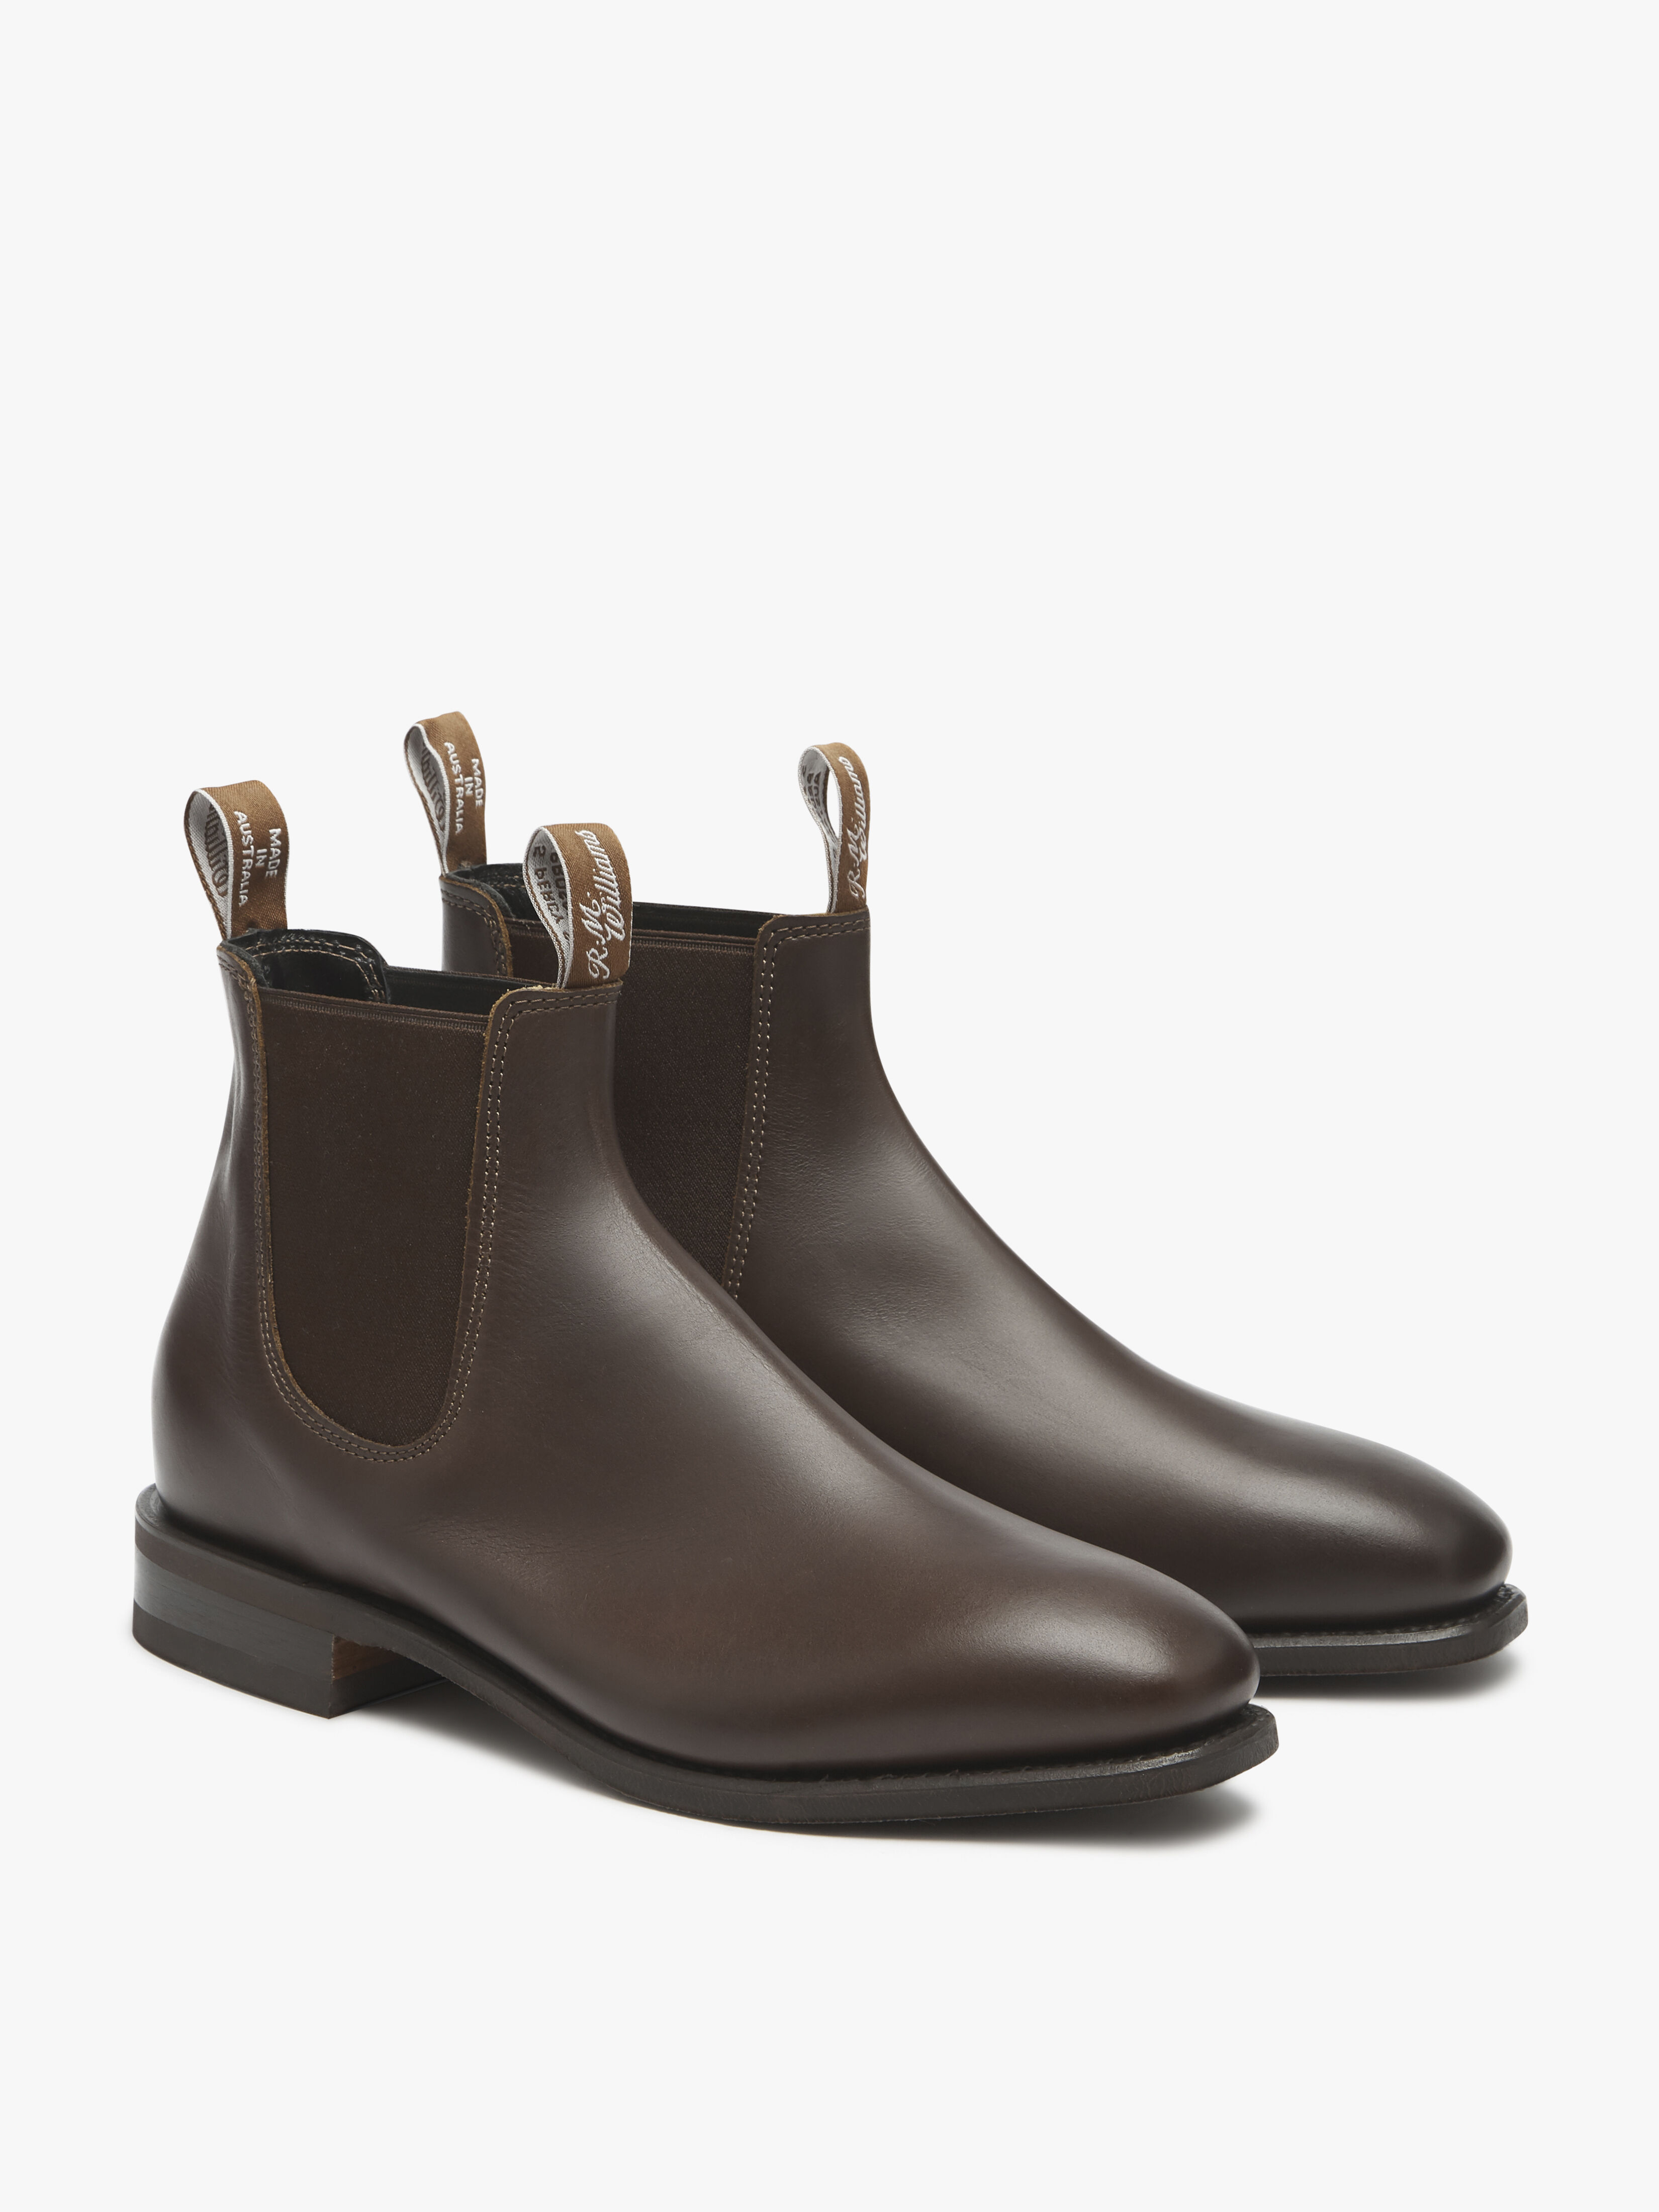 most comfortable rm williams boots